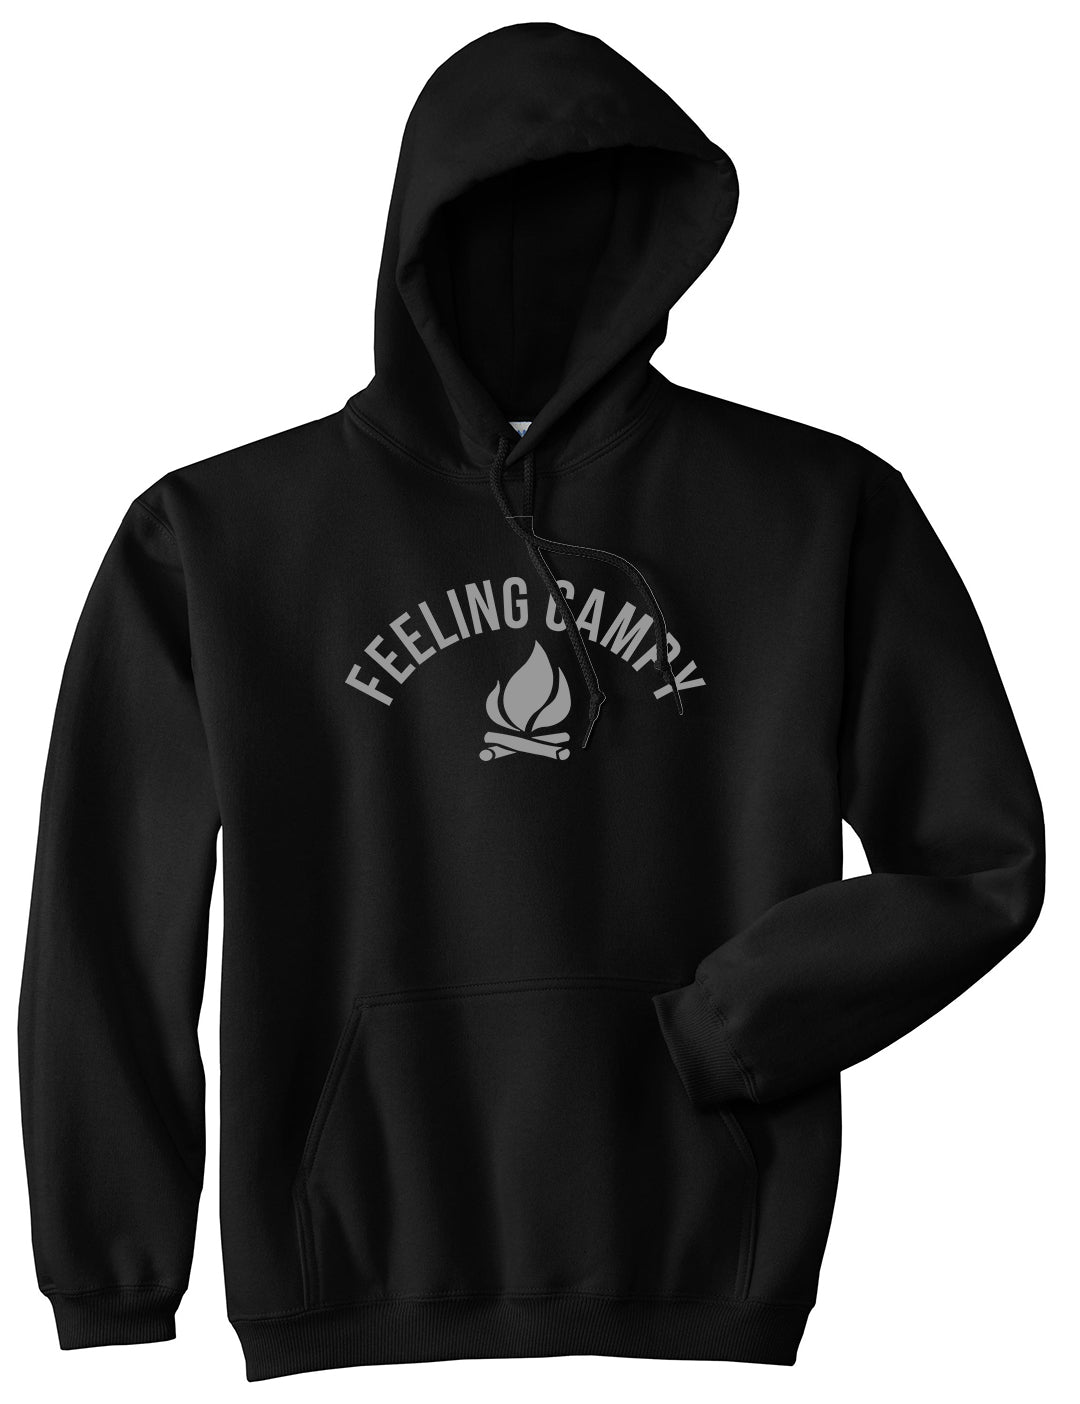 Feeling Campy Camp Fire Outdoor Mens Pullover Hoodie Black